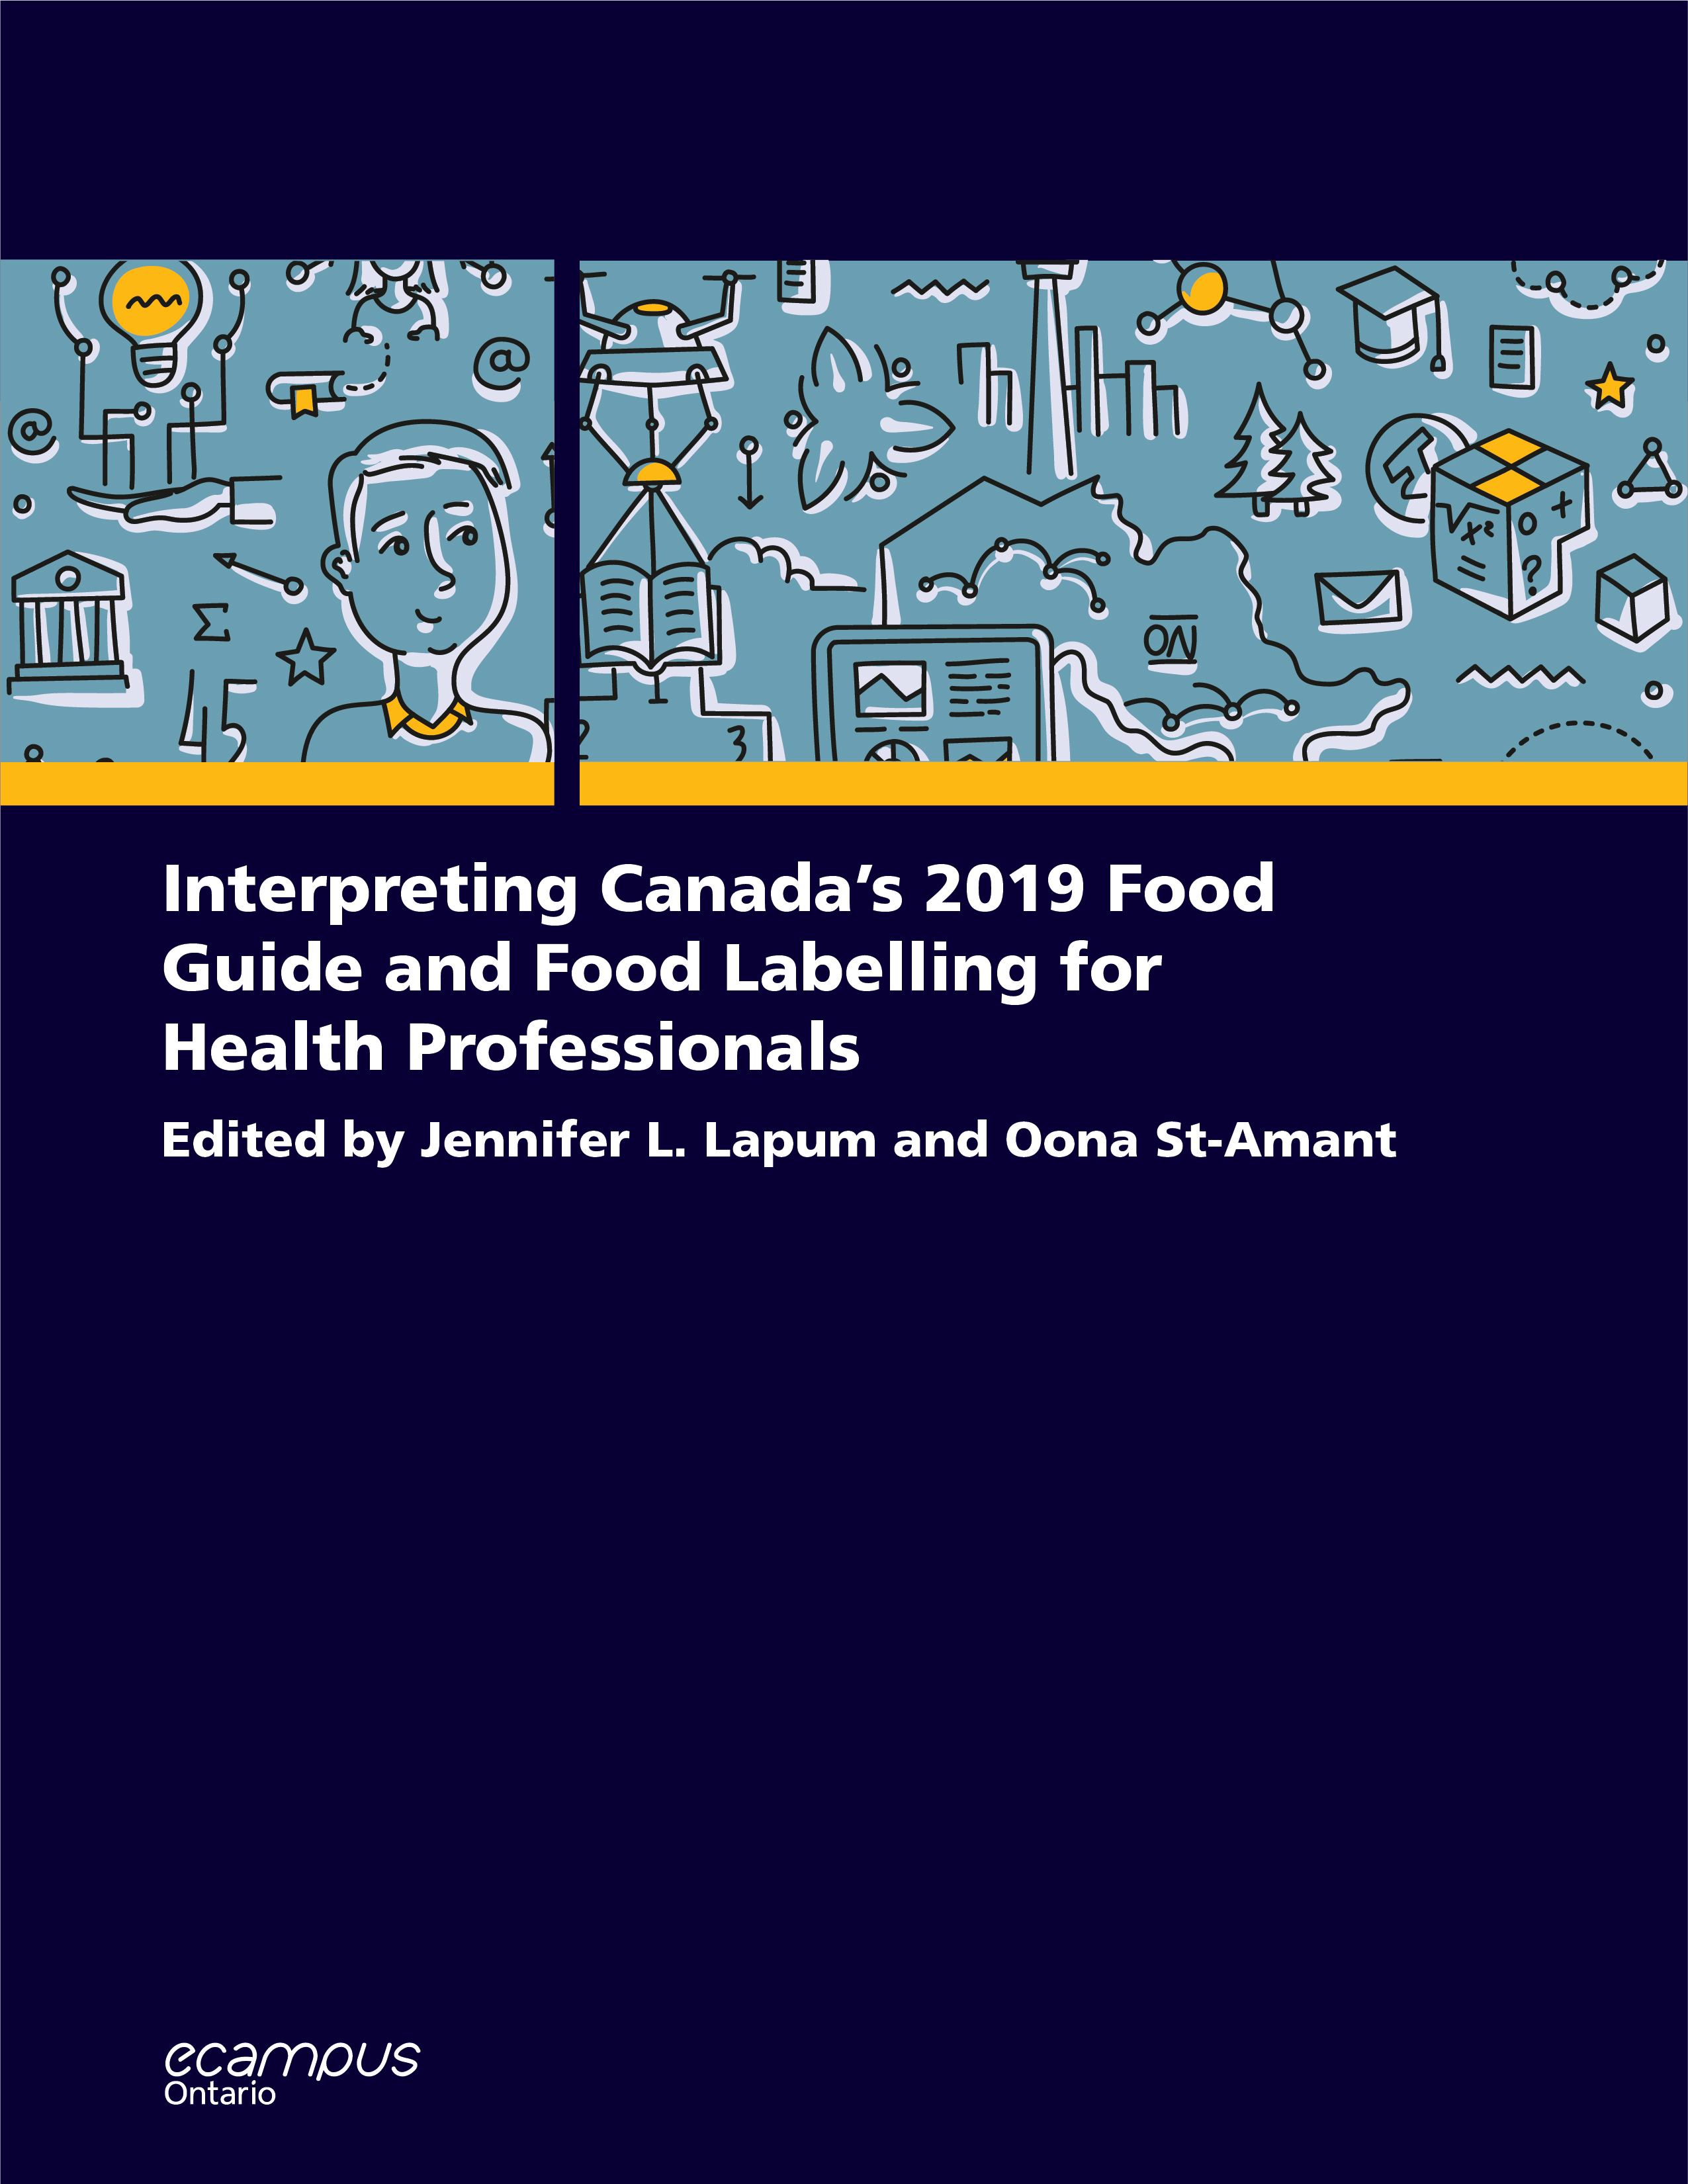 Read more about Interpreting Canada’s 2019 Food Guide and Food Labelling for Health Professionals